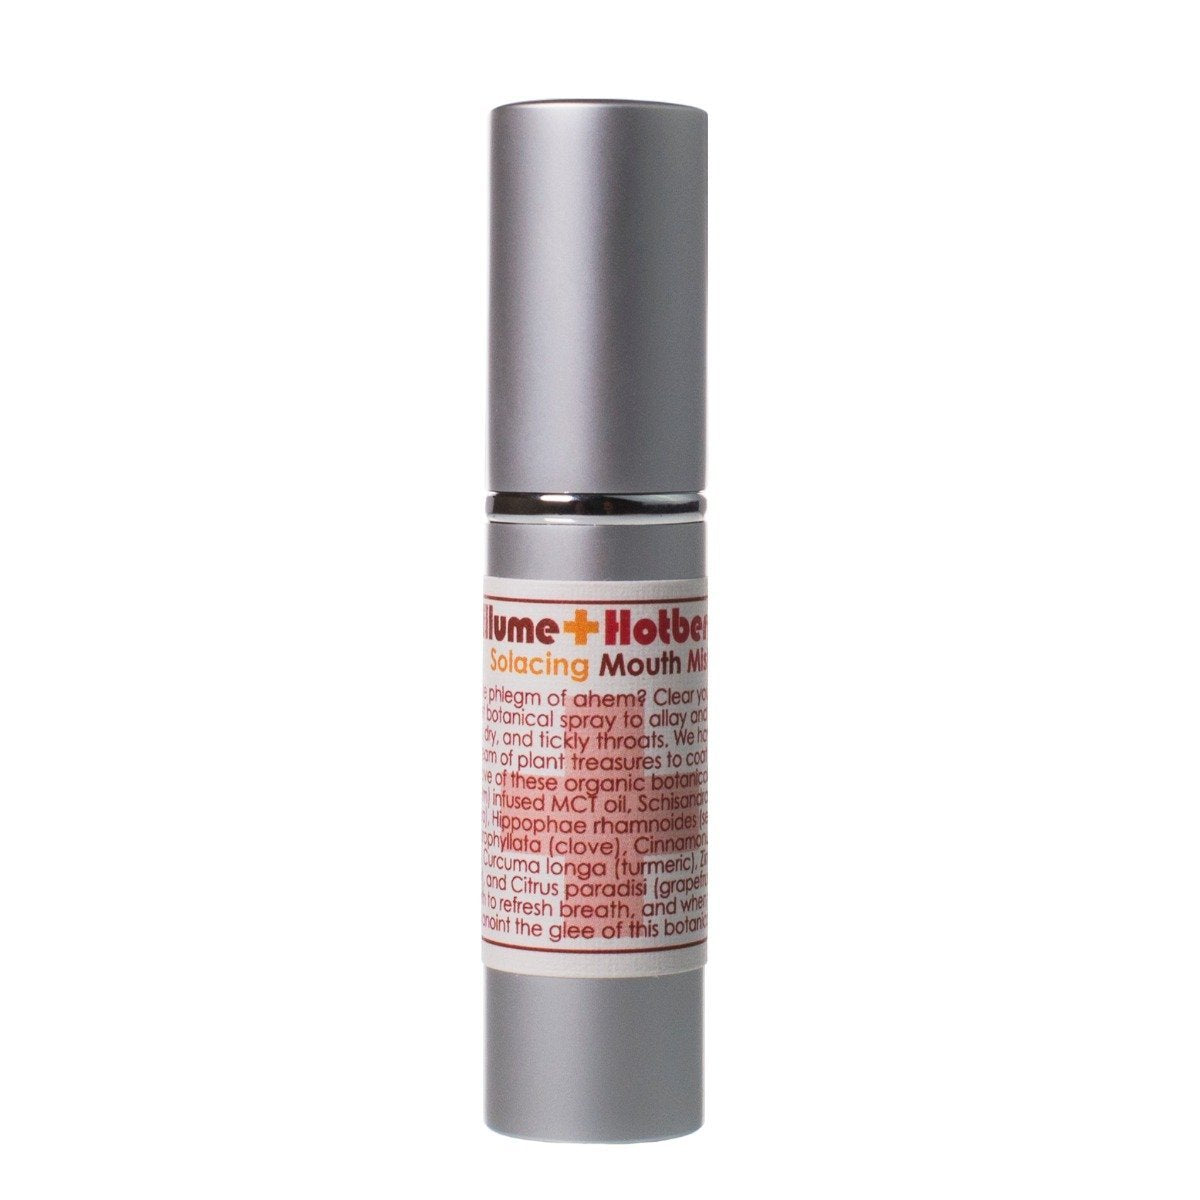 Solacing Mouth Mist - Illume Hotberry